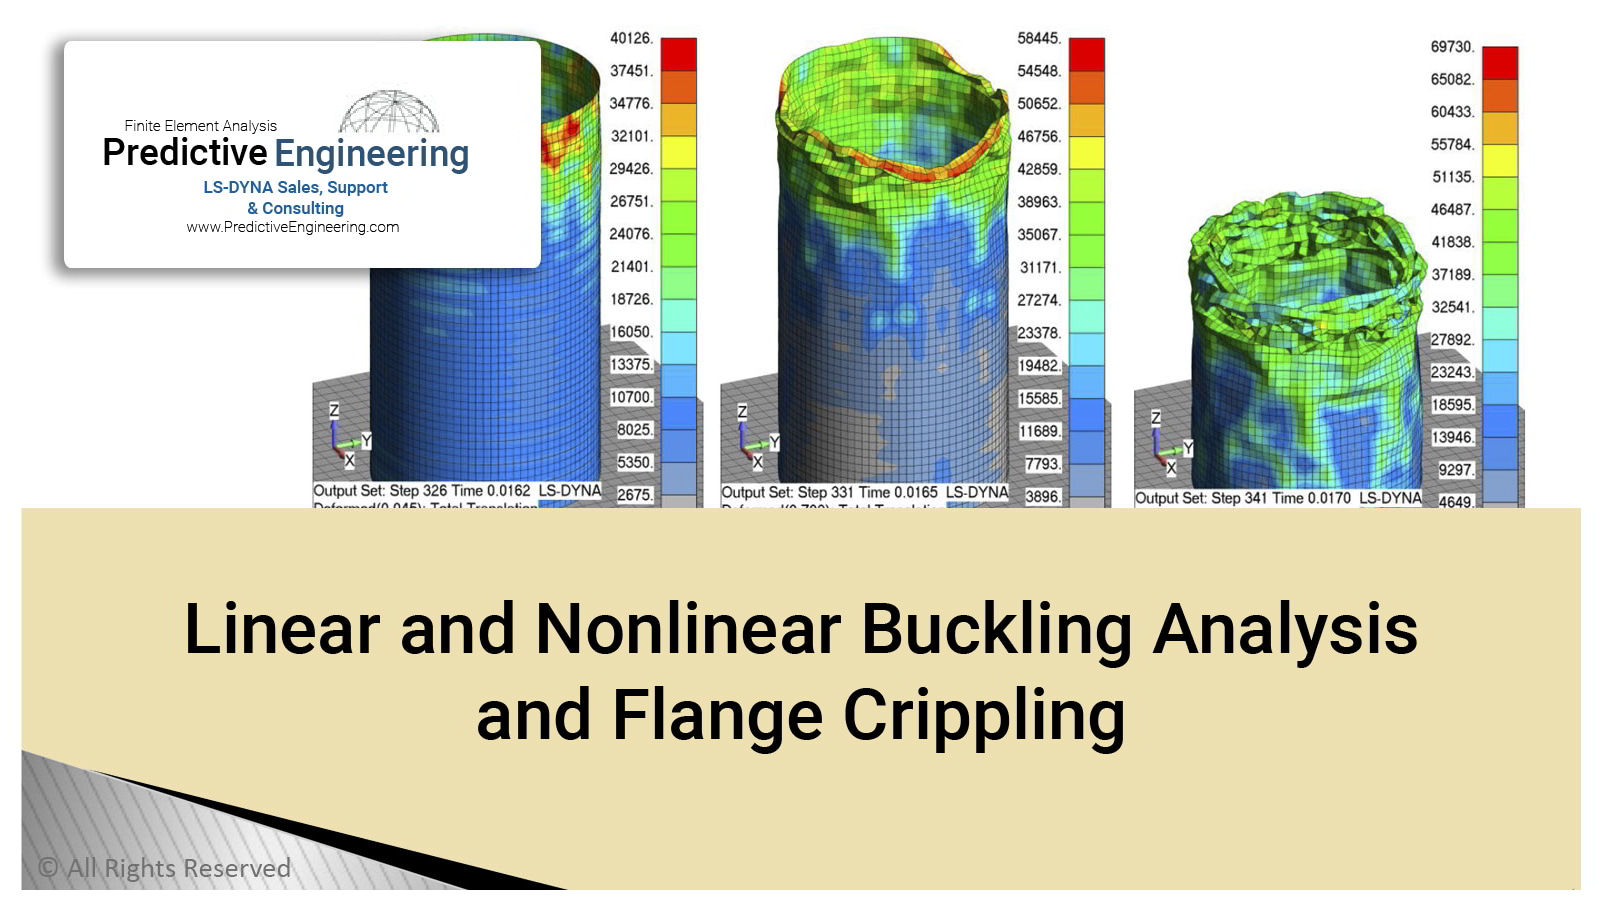 Linear and Nonlinear Buckling Analysis and Flange Crippling Image